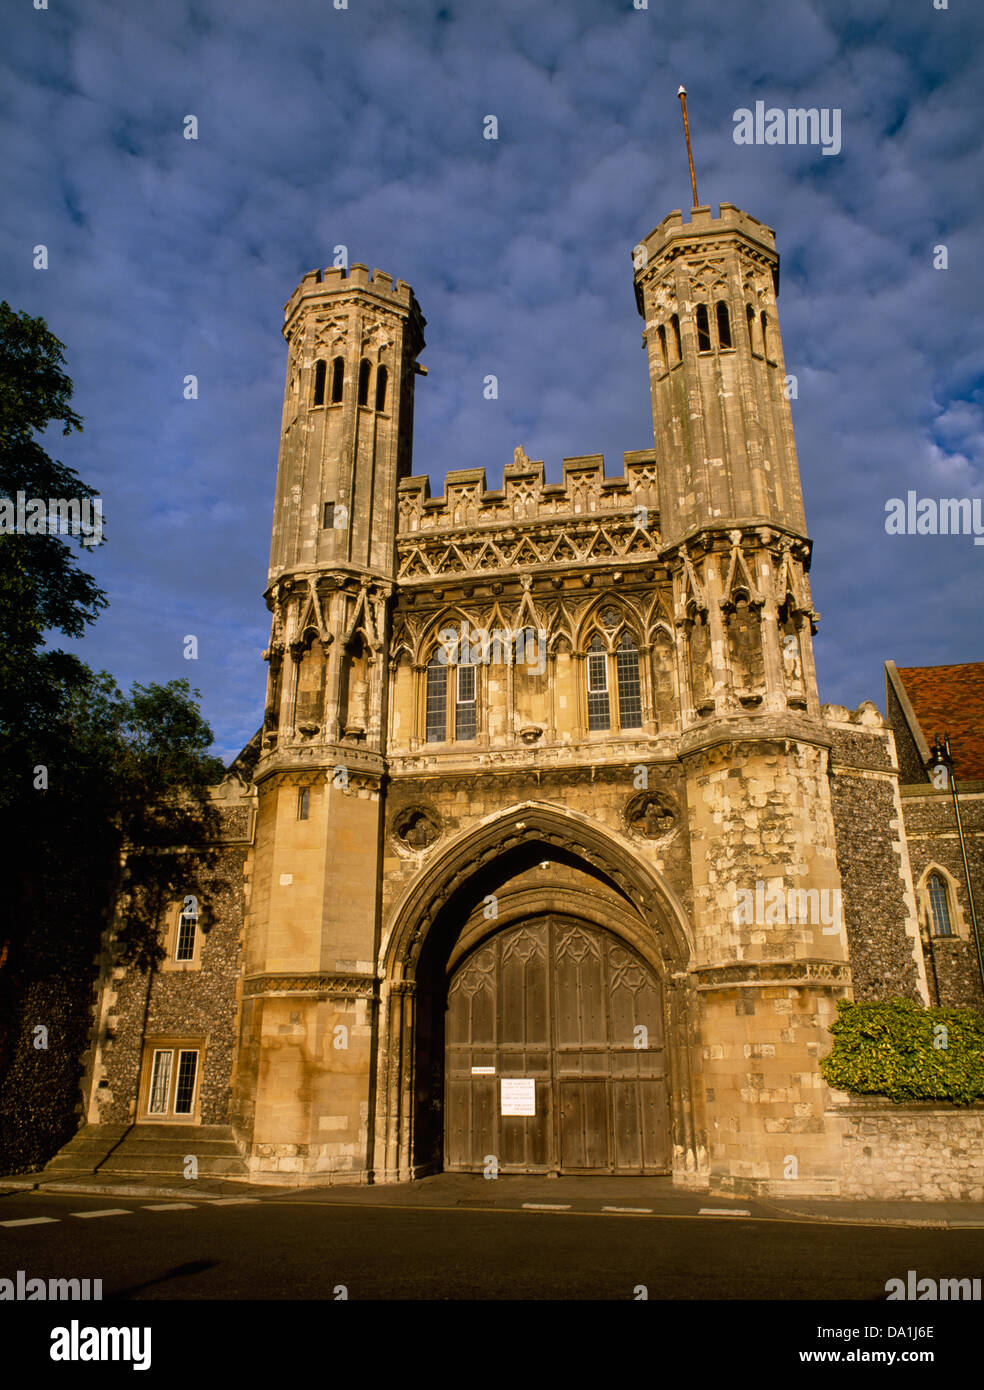 The early C14th Fyndon Gate leading to the King's School, Canterbury, Kent, was formerly the main entrance to St Augustine's Abbey. Stock Photo